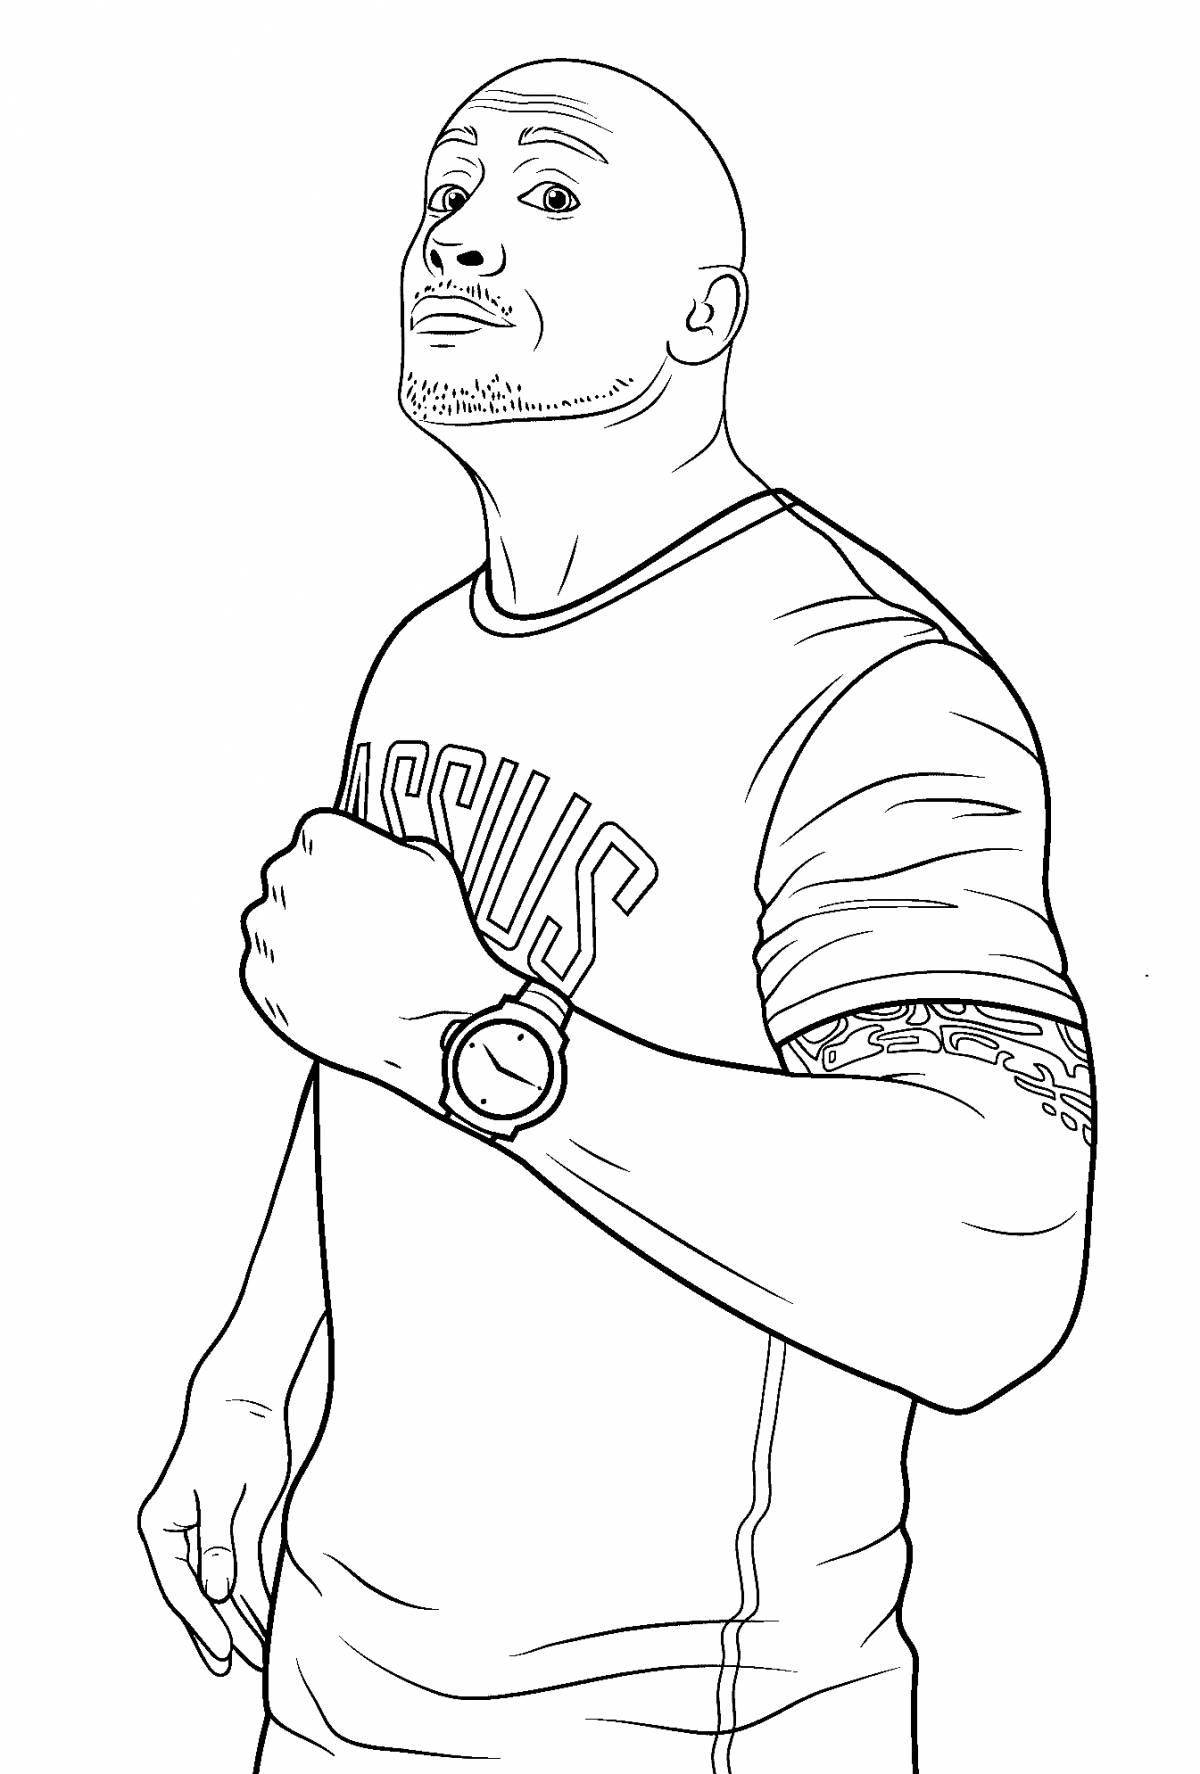 Vin diesel animated coloring page